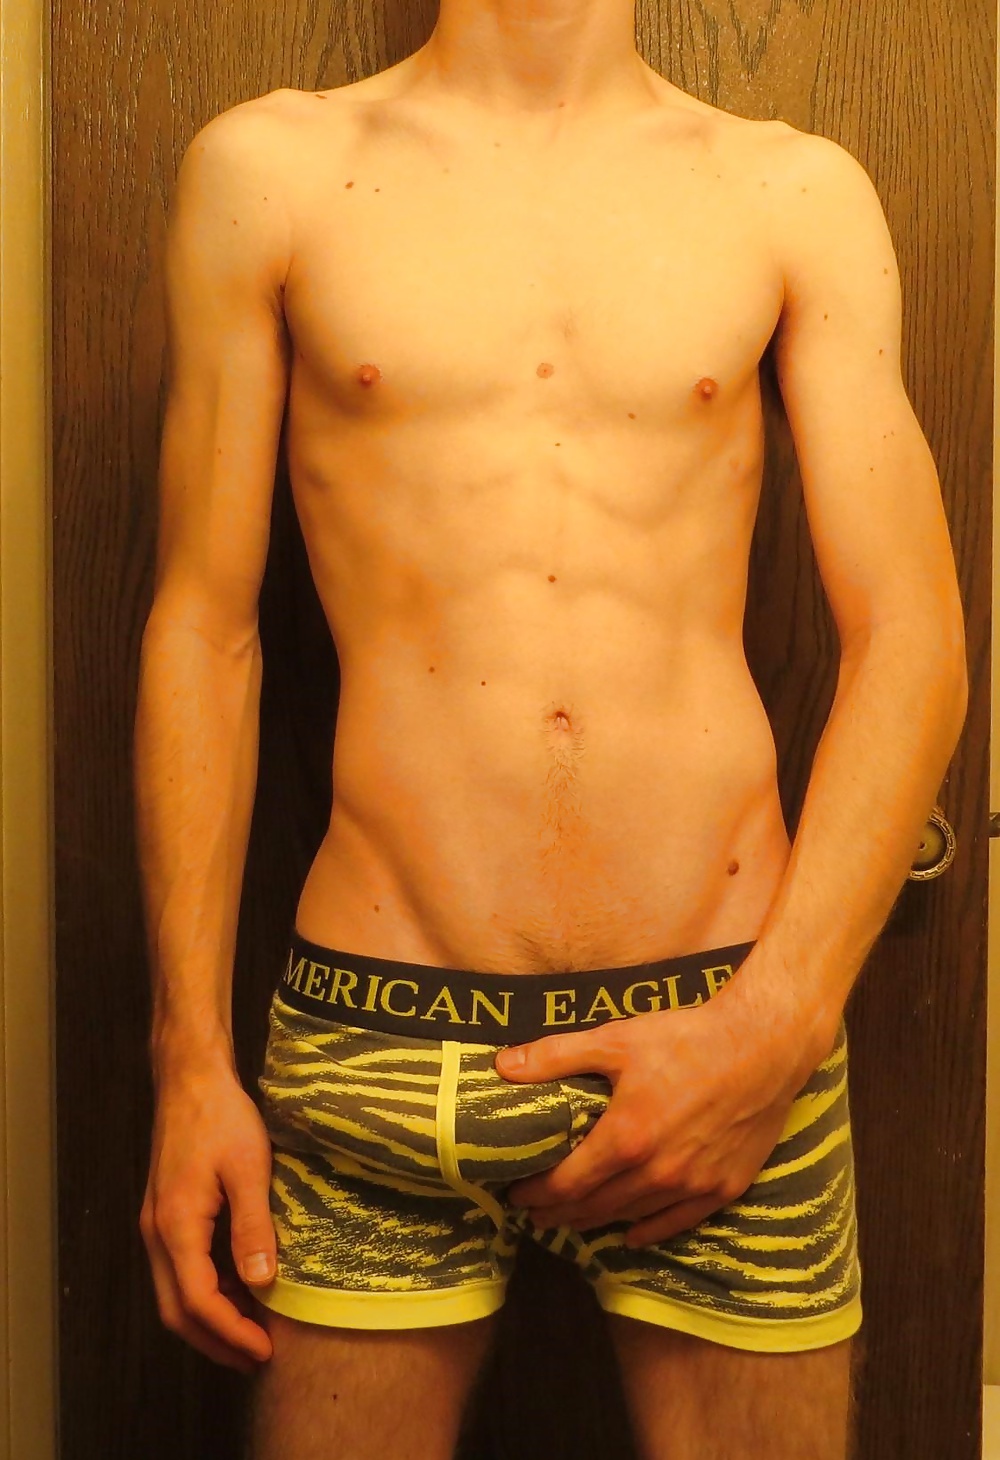 Cute Guys With Their Super Cute Undies And Jock-Straps #40691027